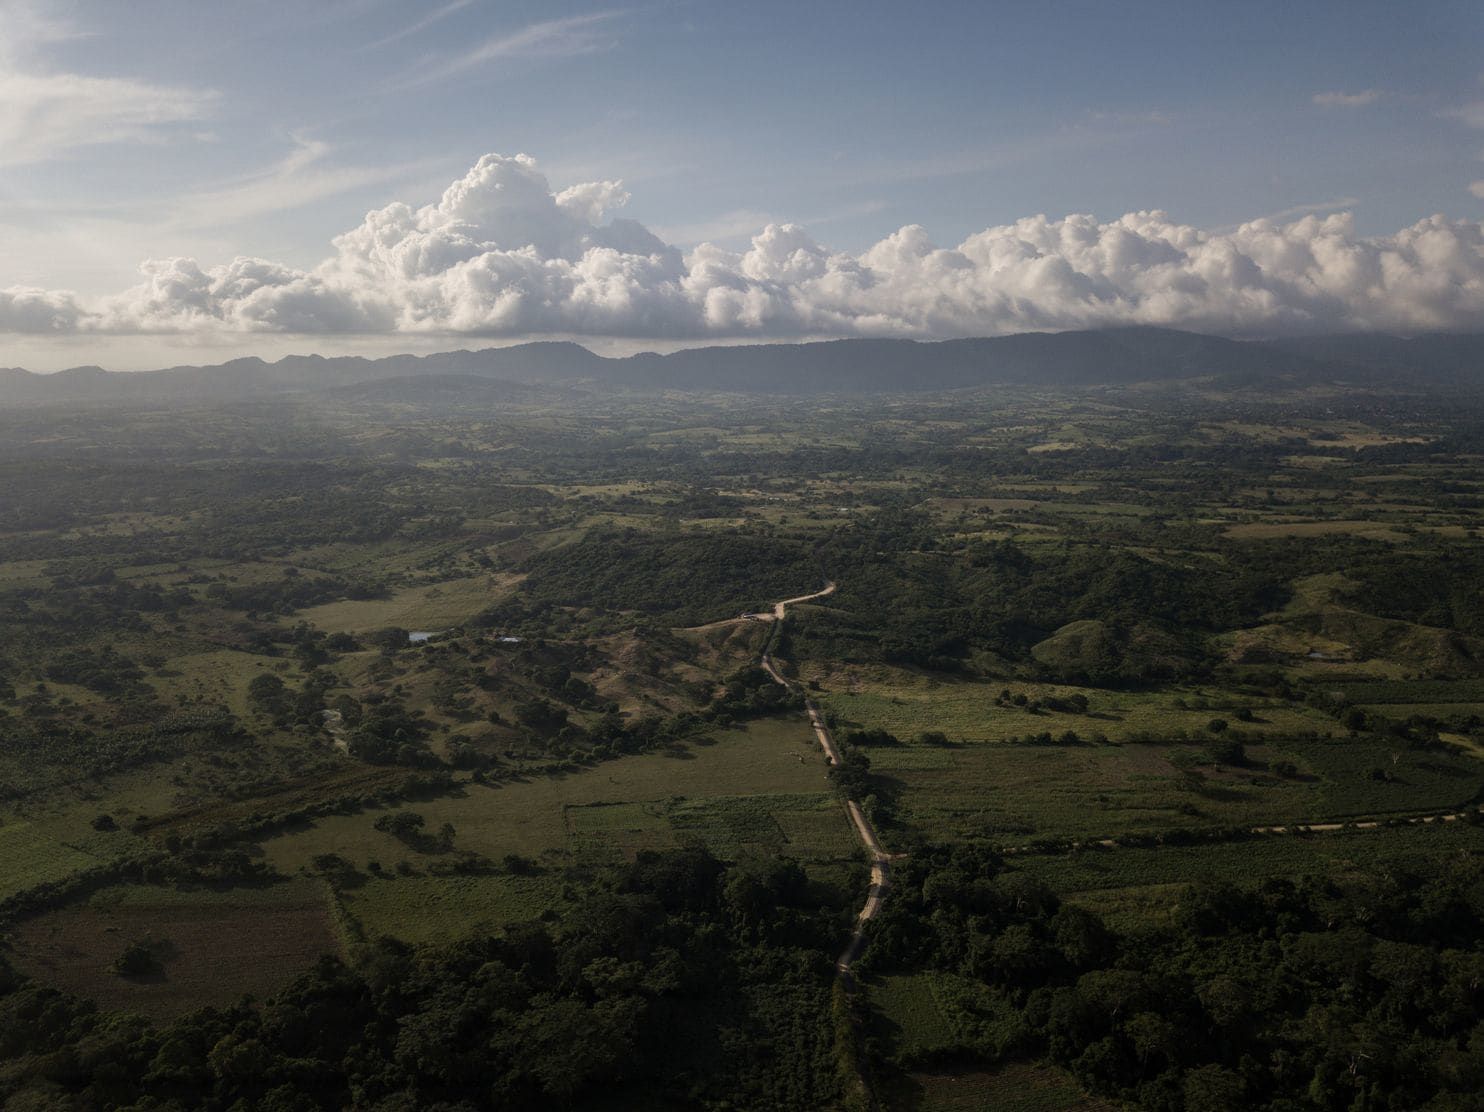 An aerial view of the Montes de María and Pichilín in Colombia’s Sucre region. Image by Ivan Valencia/For The Washington Post. Colombia, 2018.